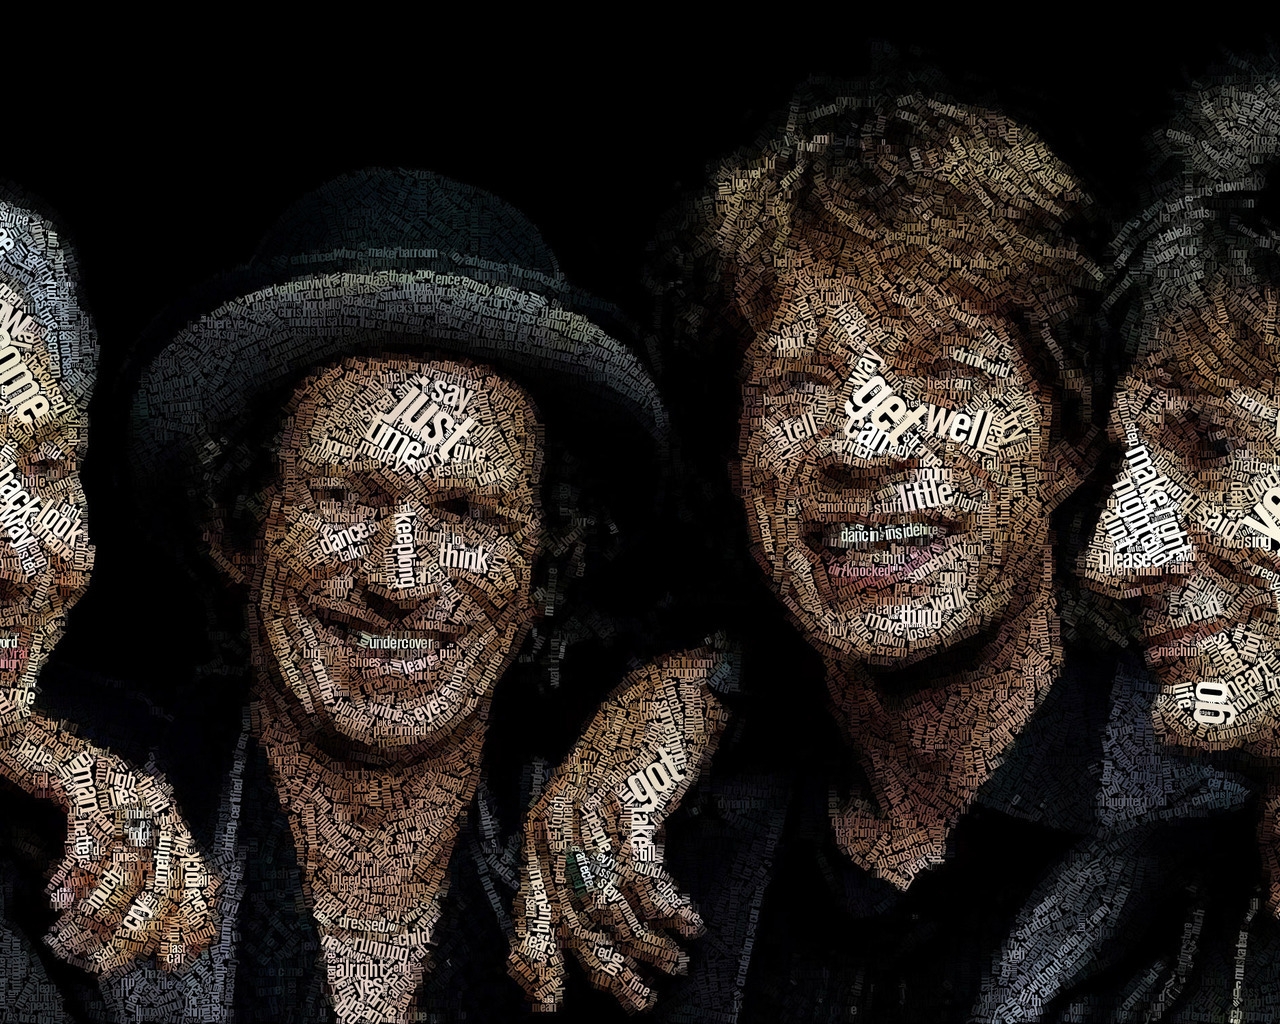 Rolling Stones Members for 1280 x 1024 resolution